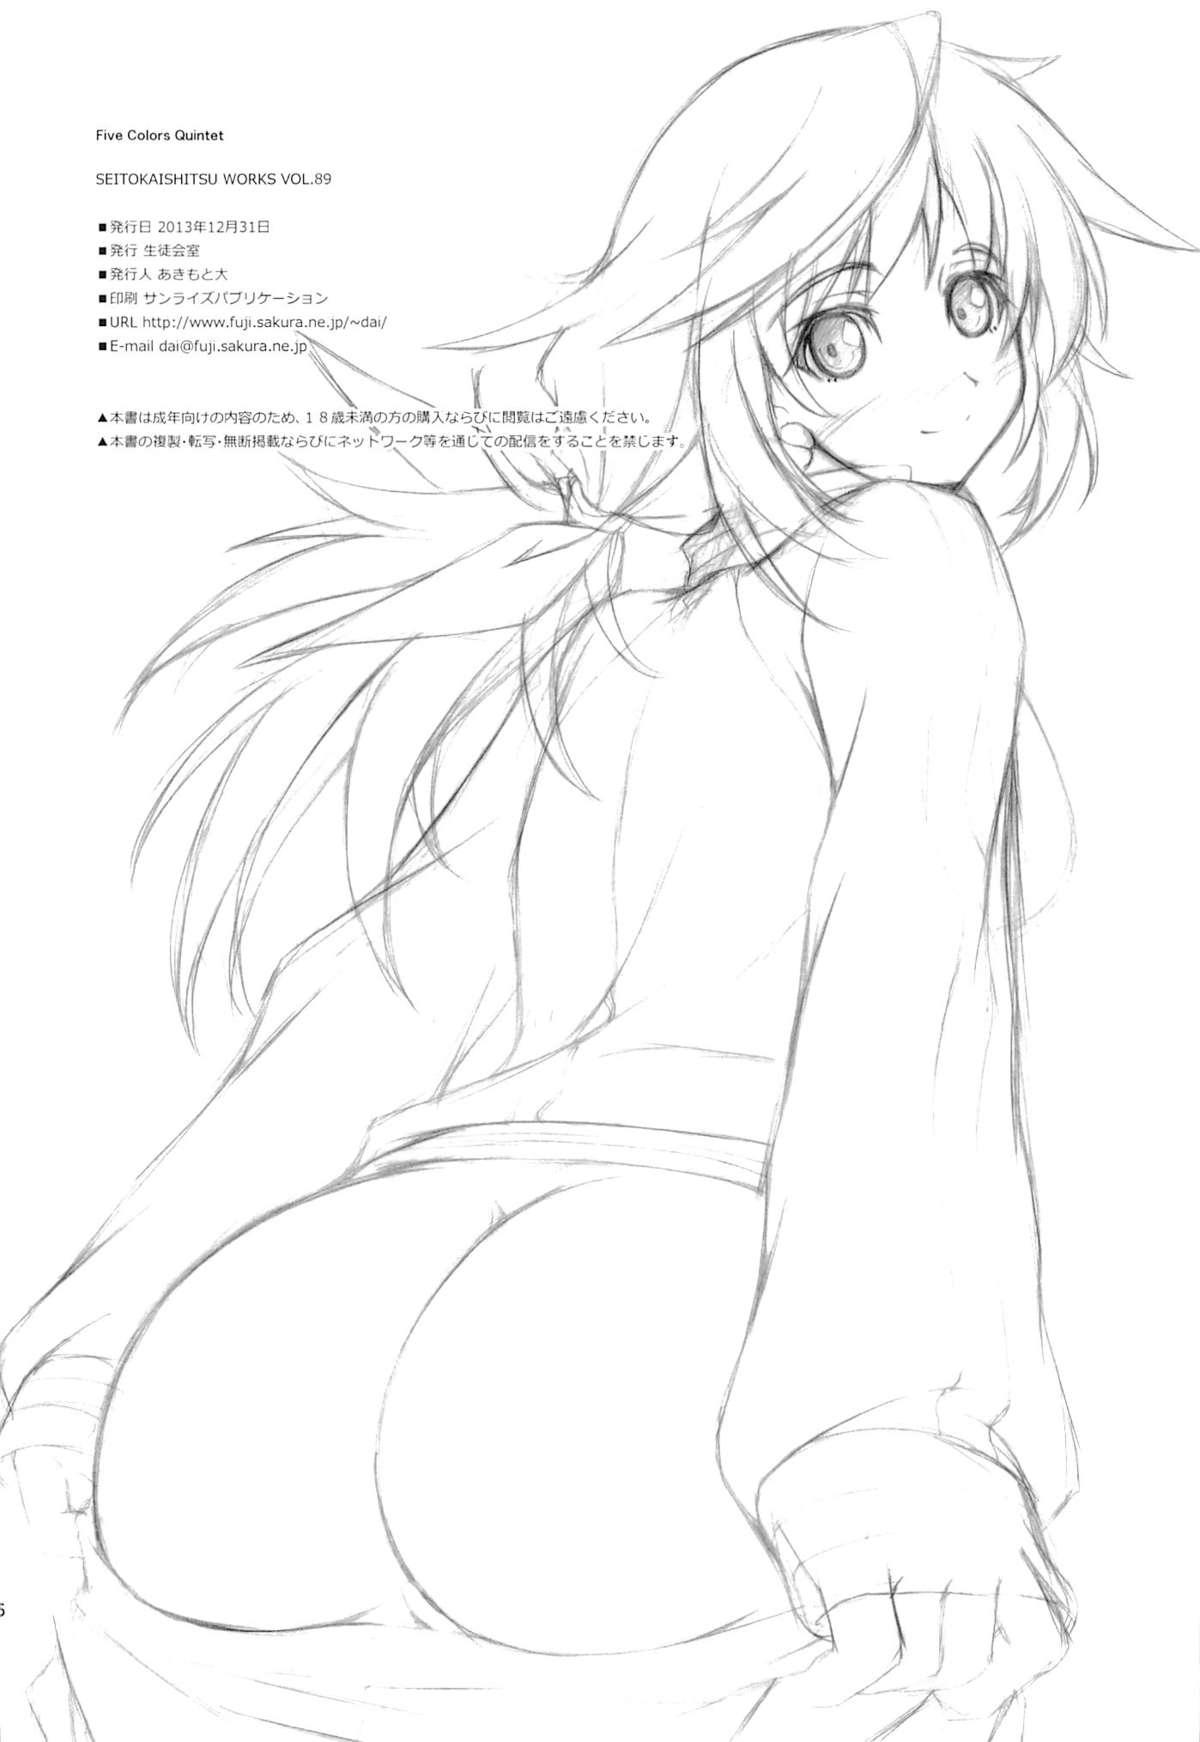 Load Five Colors Quintet - Infinite stratos Oldyoung - Page 25